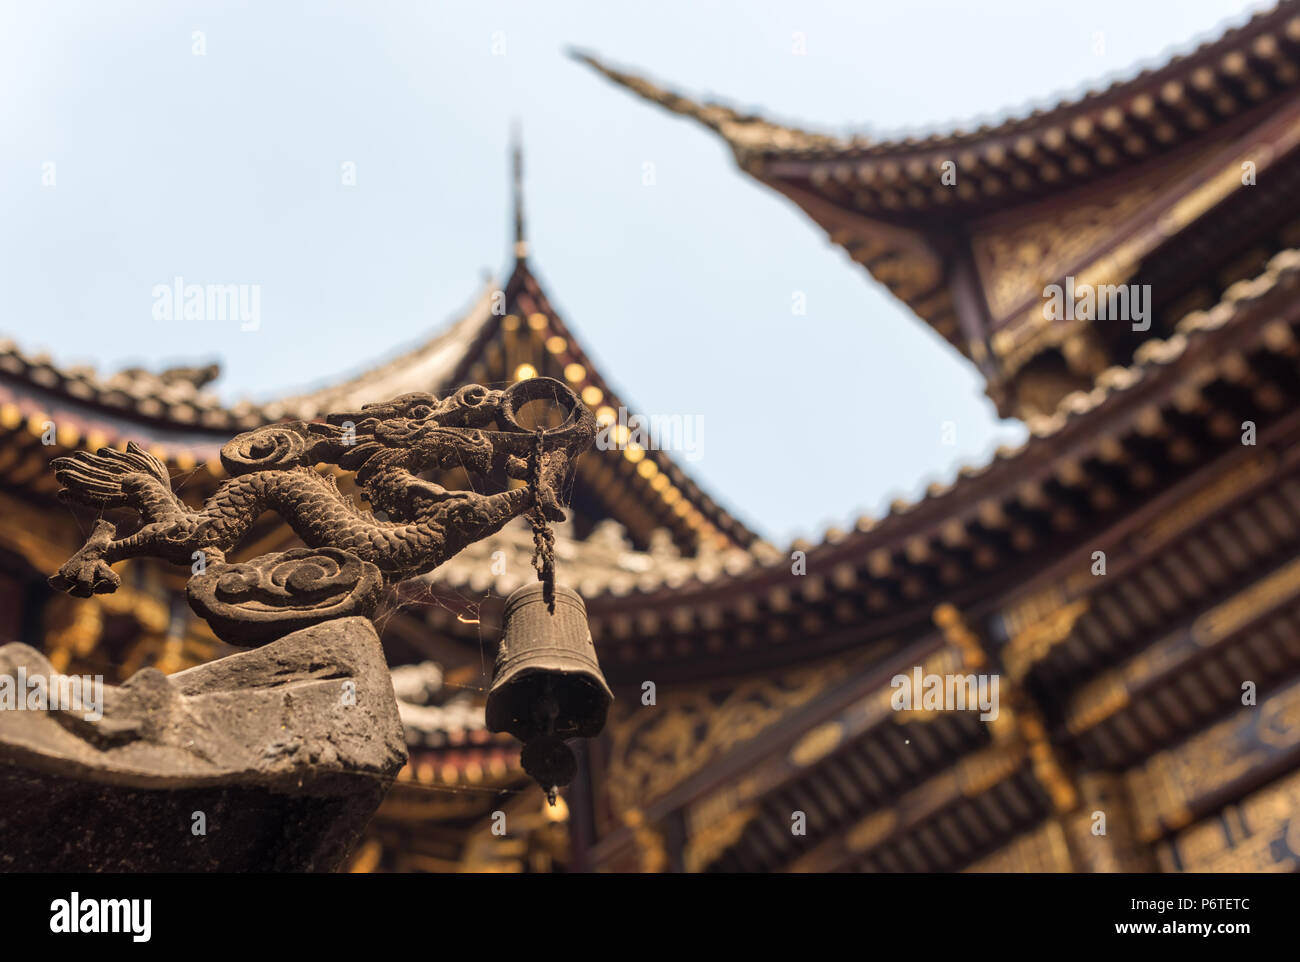 Traditional chinese architecture details in BaoLunSi temple Chongqing, China Stock Photo